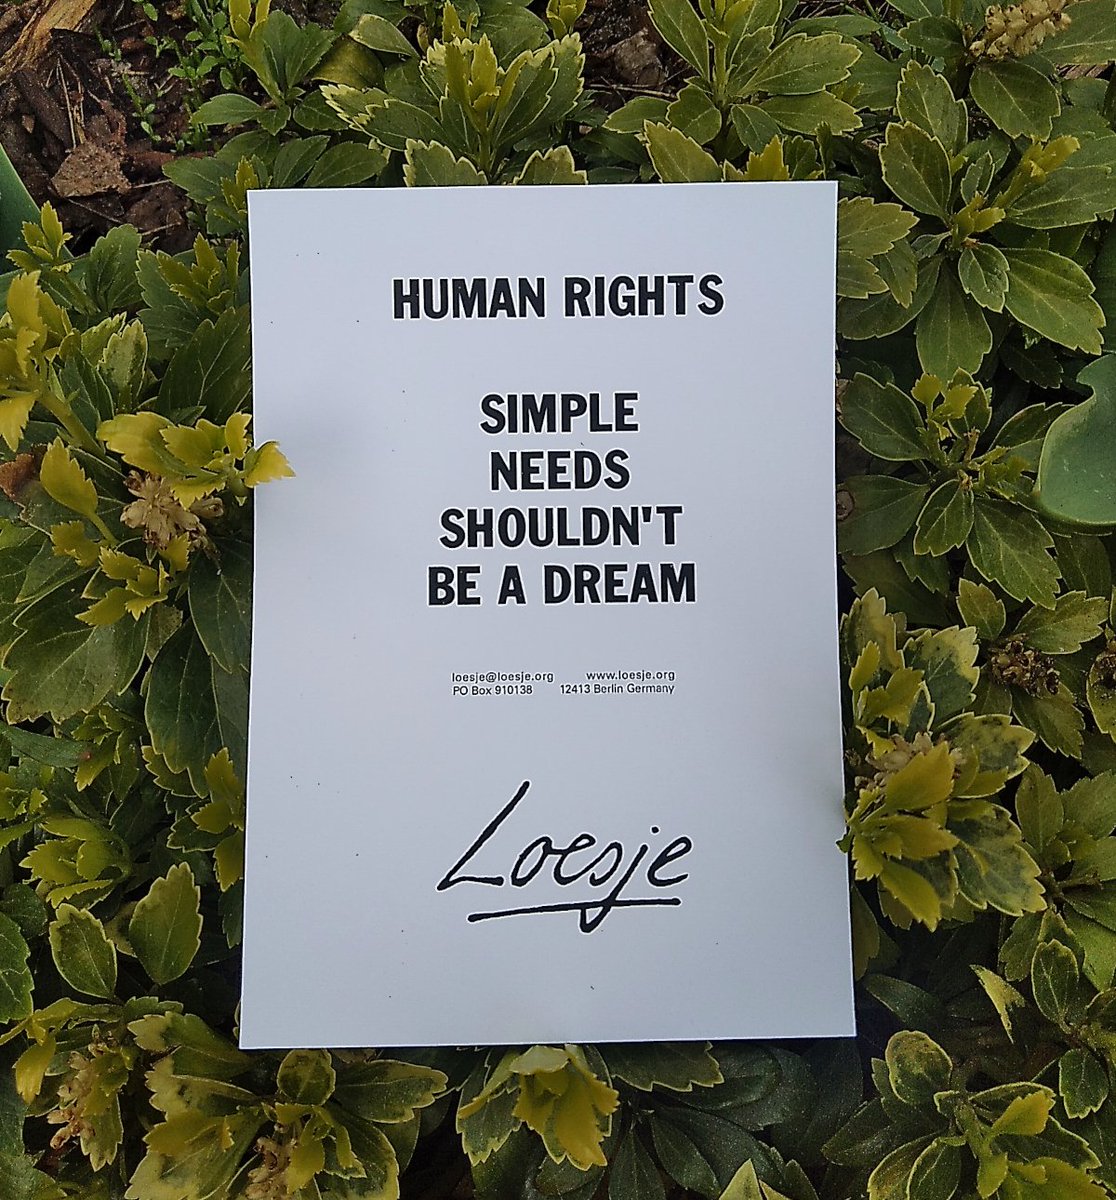 Human rights 
   simple needs shouldn't be a dream

#Loesje
#humanrights #needs #rights #equality
#peace #peaceforeveryone #peacenow